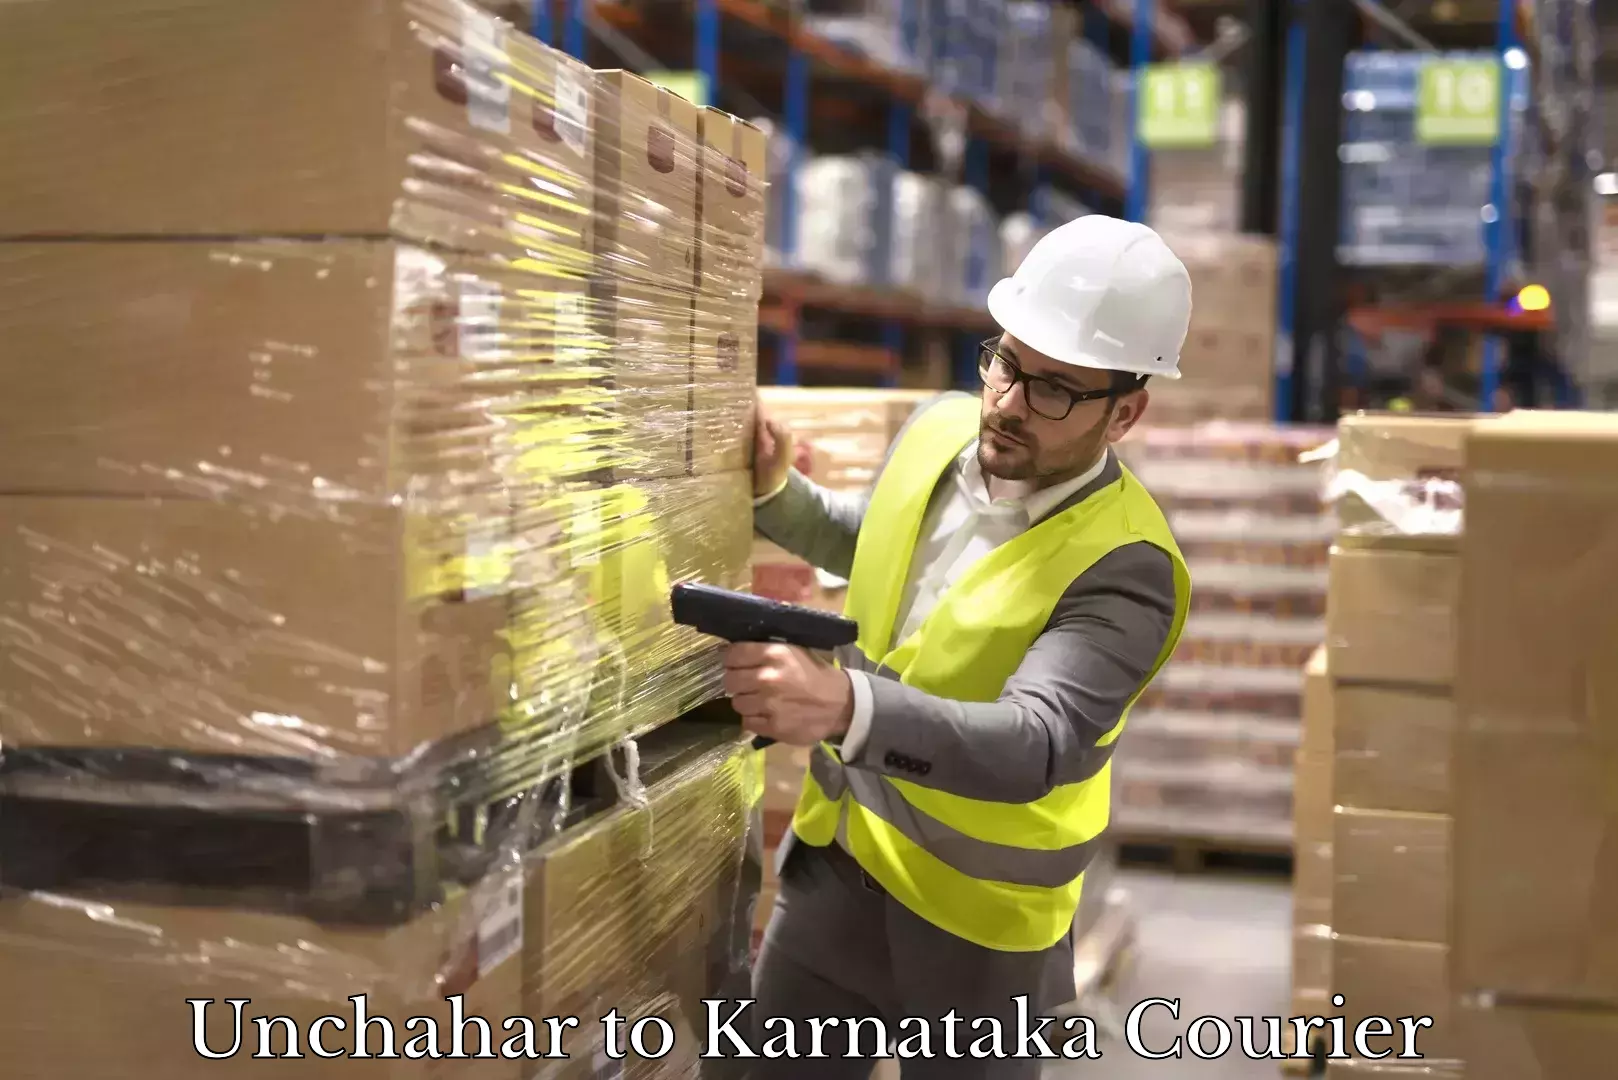 Reliable courier services in Unchahar to Karnataka